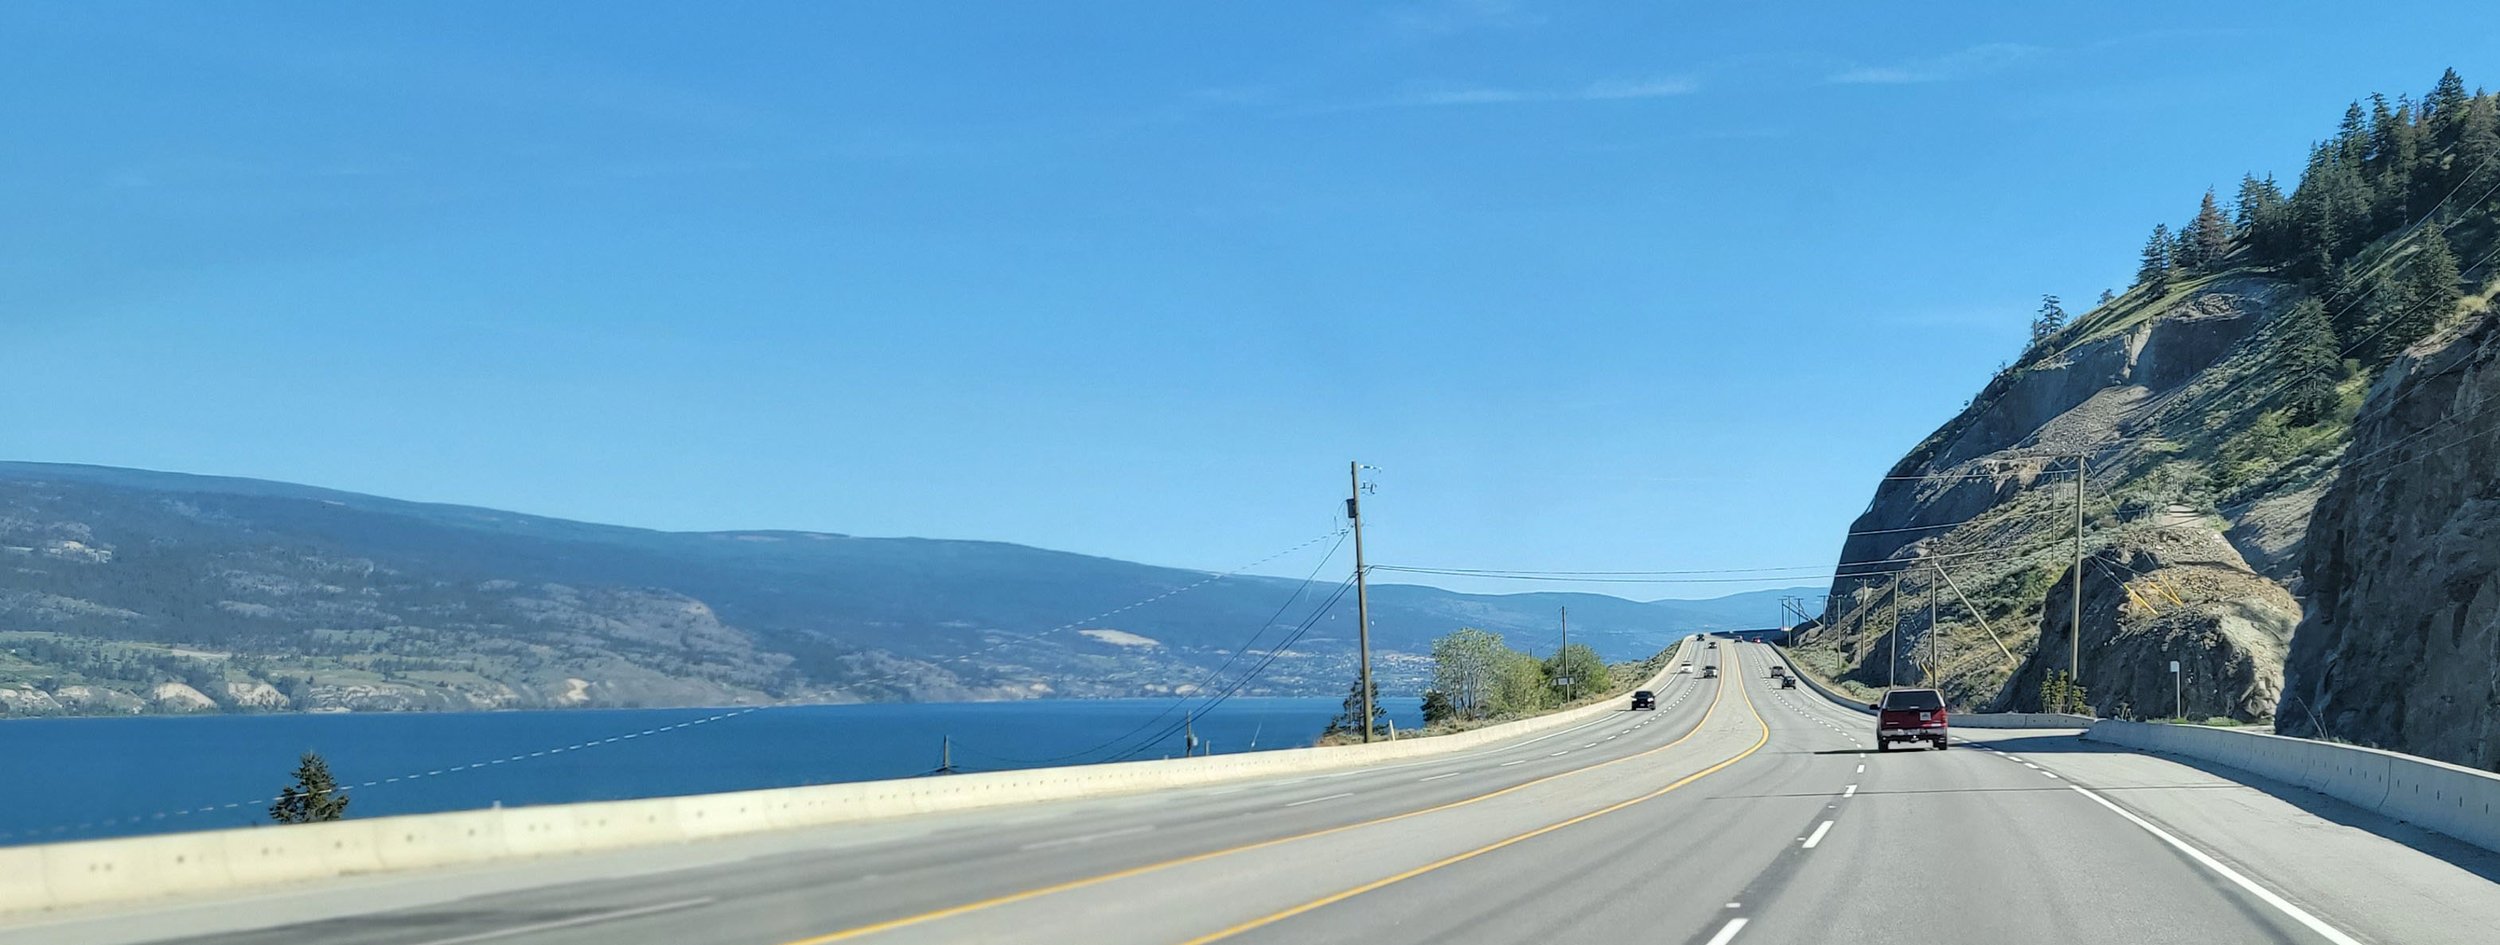 Taking the highway south through Summerland. Amazing views all along the lake from Vernon to Osoyoos.